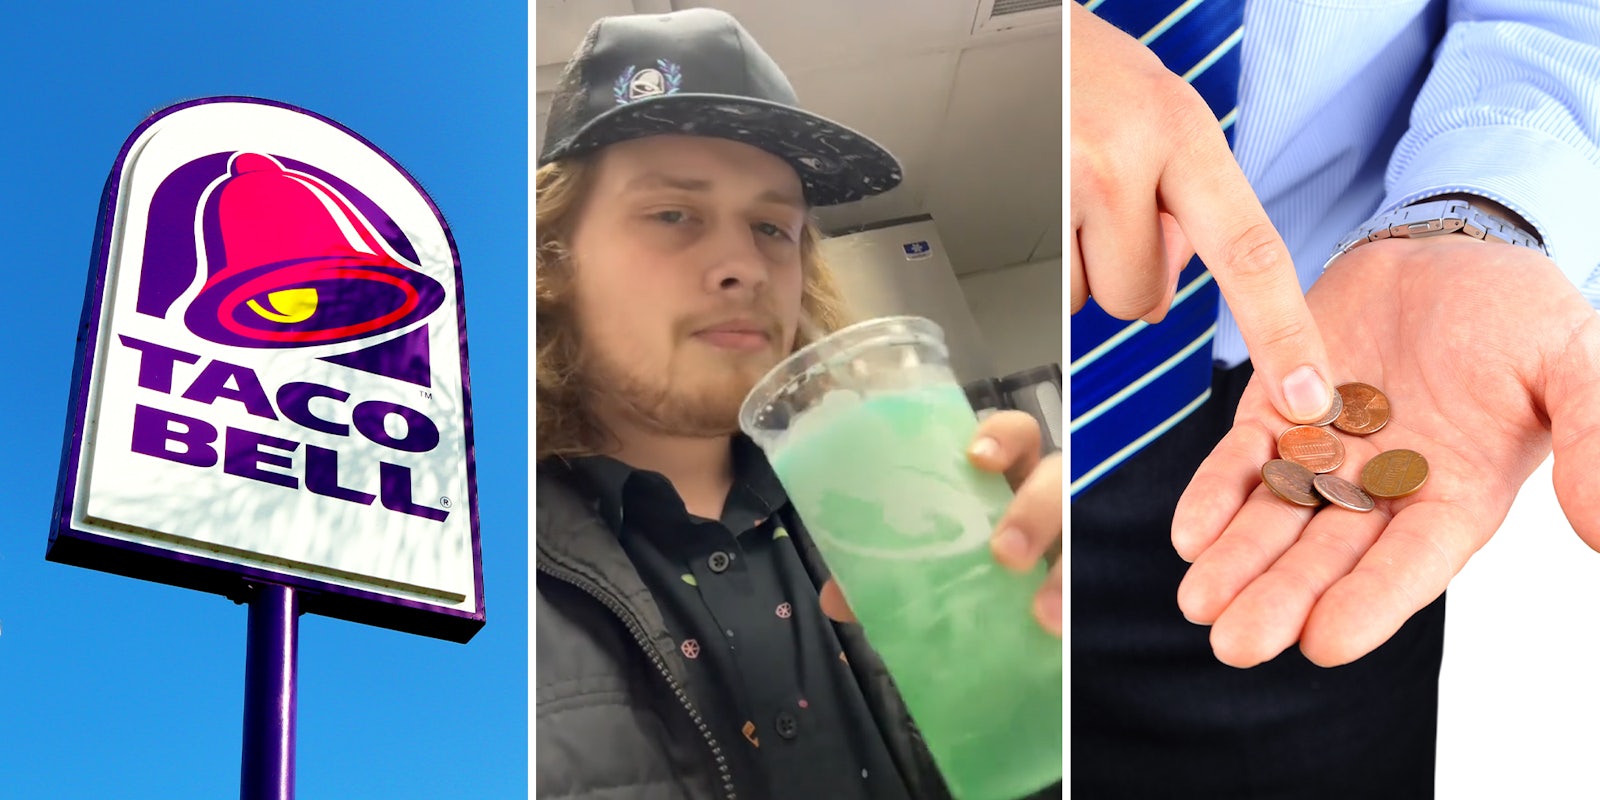 Taco Bell worker says customer tried to pay in pennies to be petty